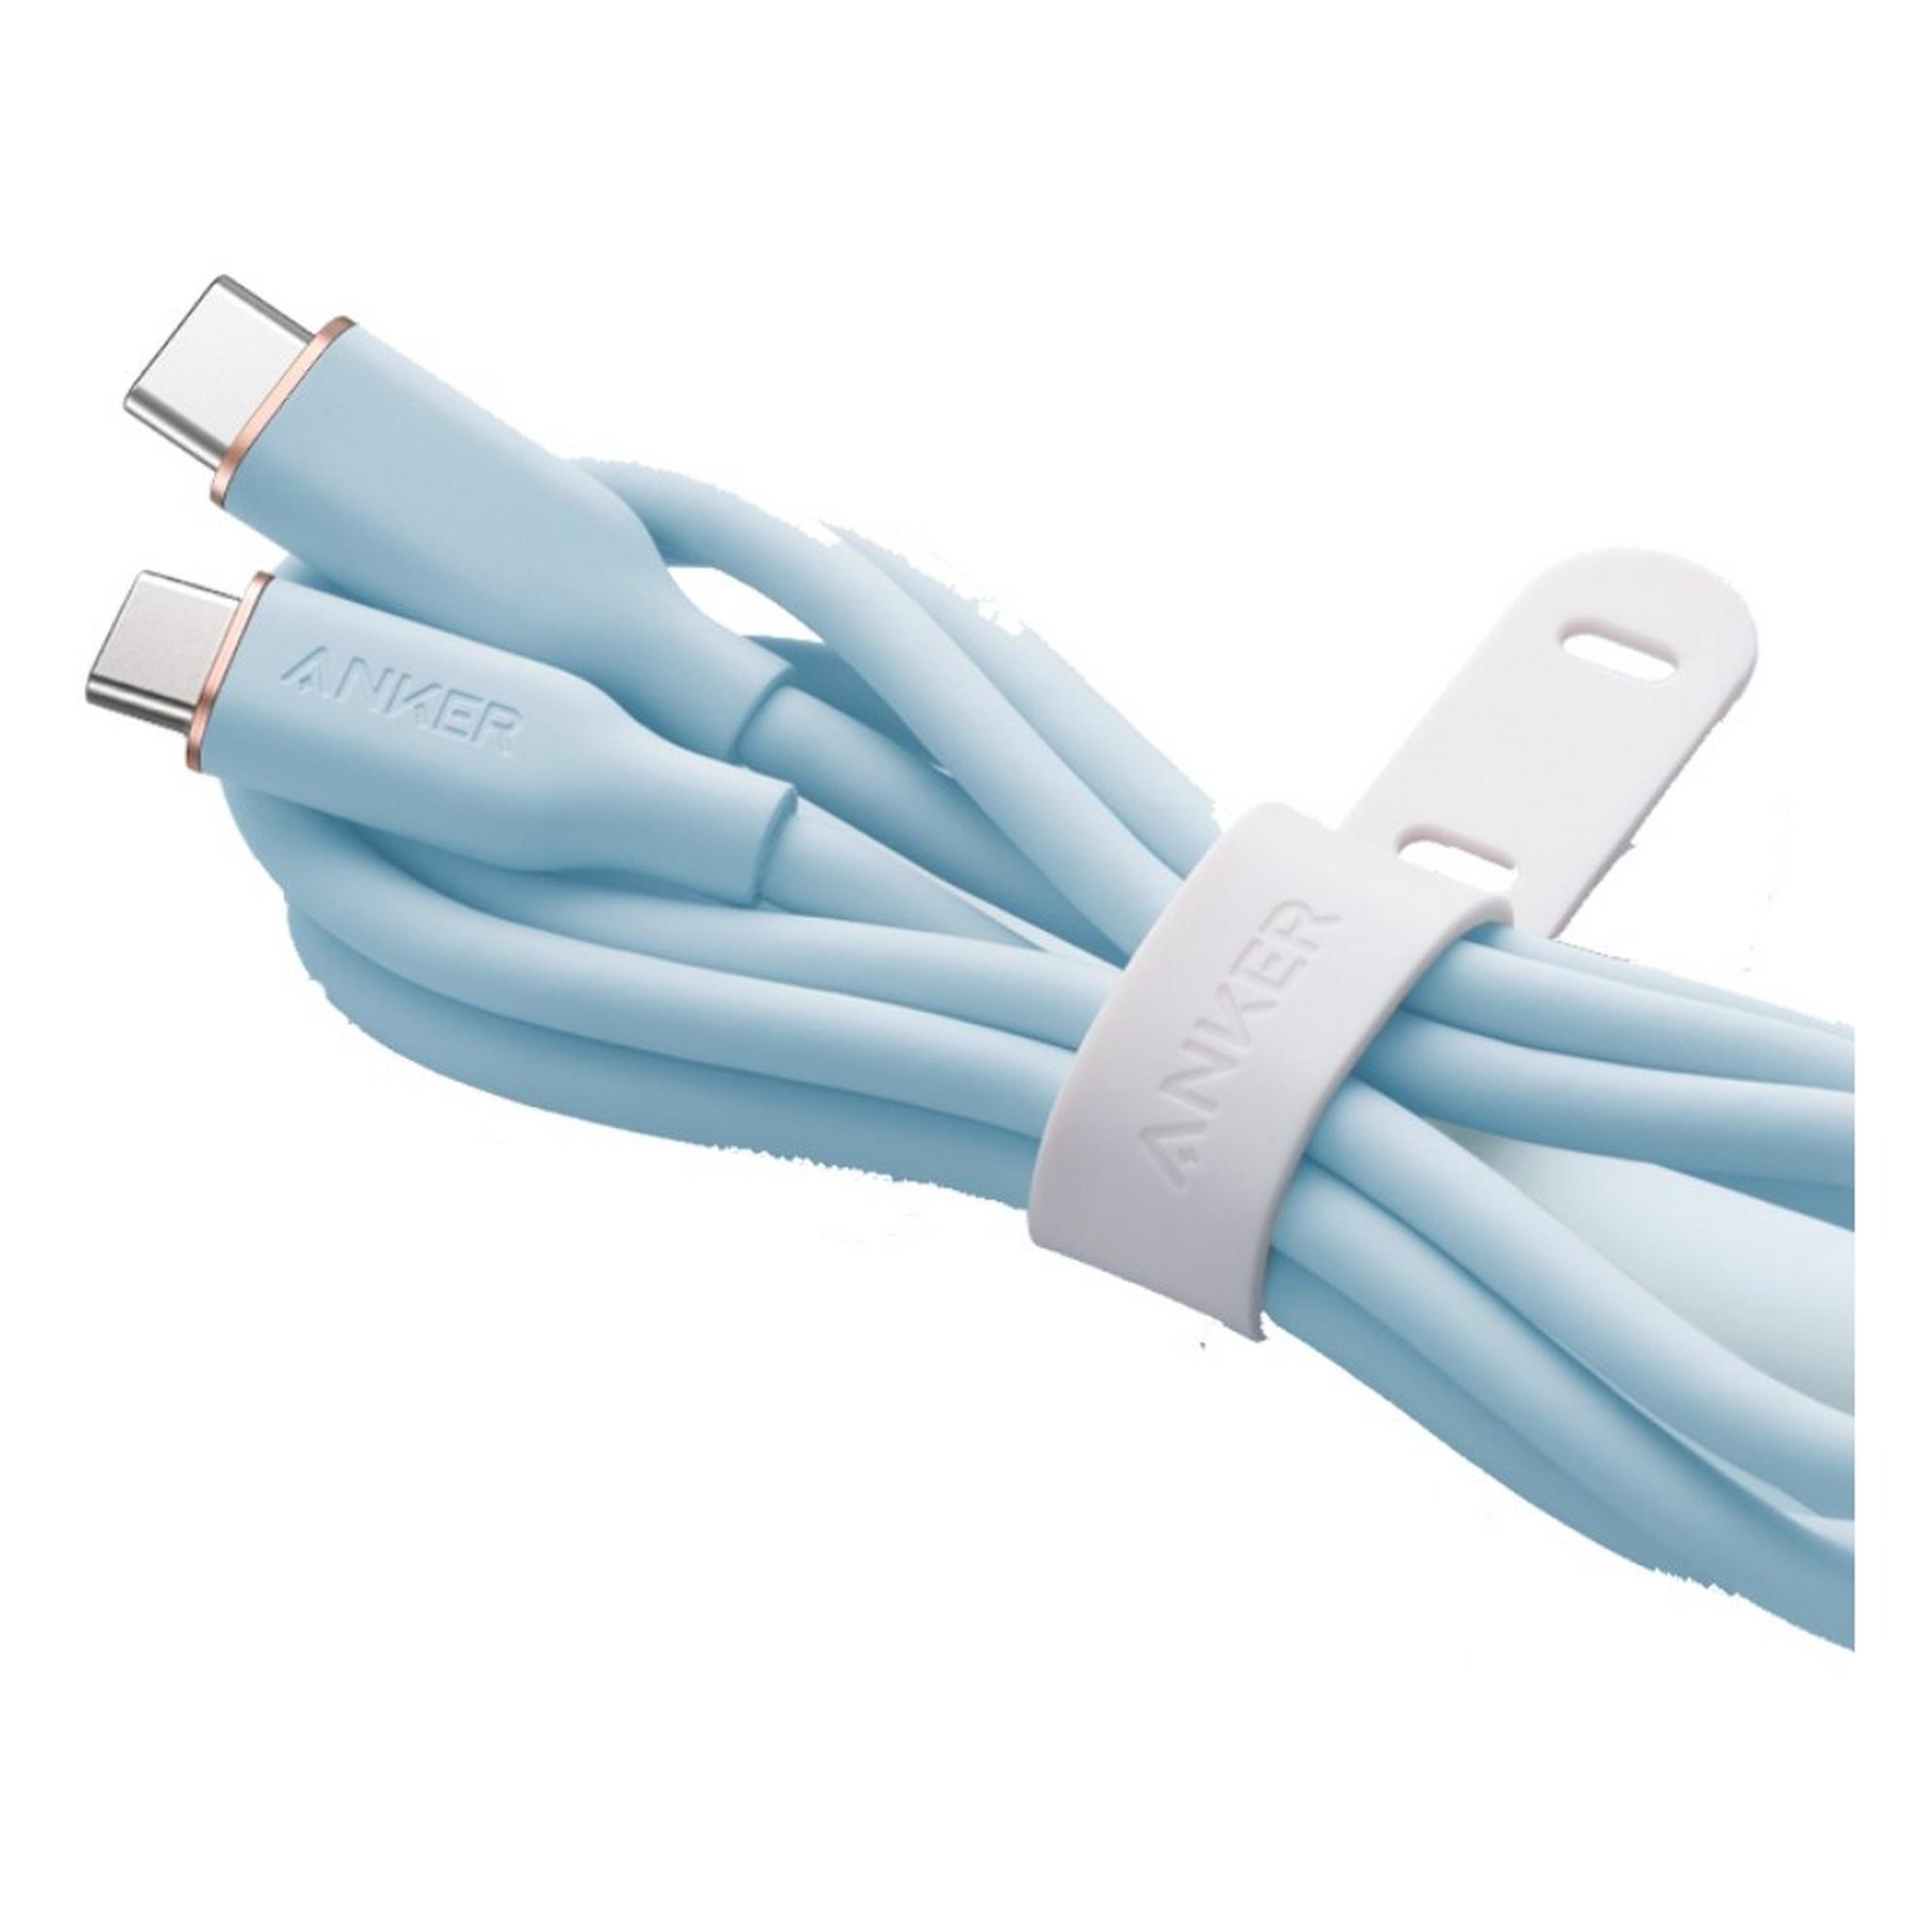 Anker PowerLine III Flow USB-C to USB-C 1.8M Cable - Blue